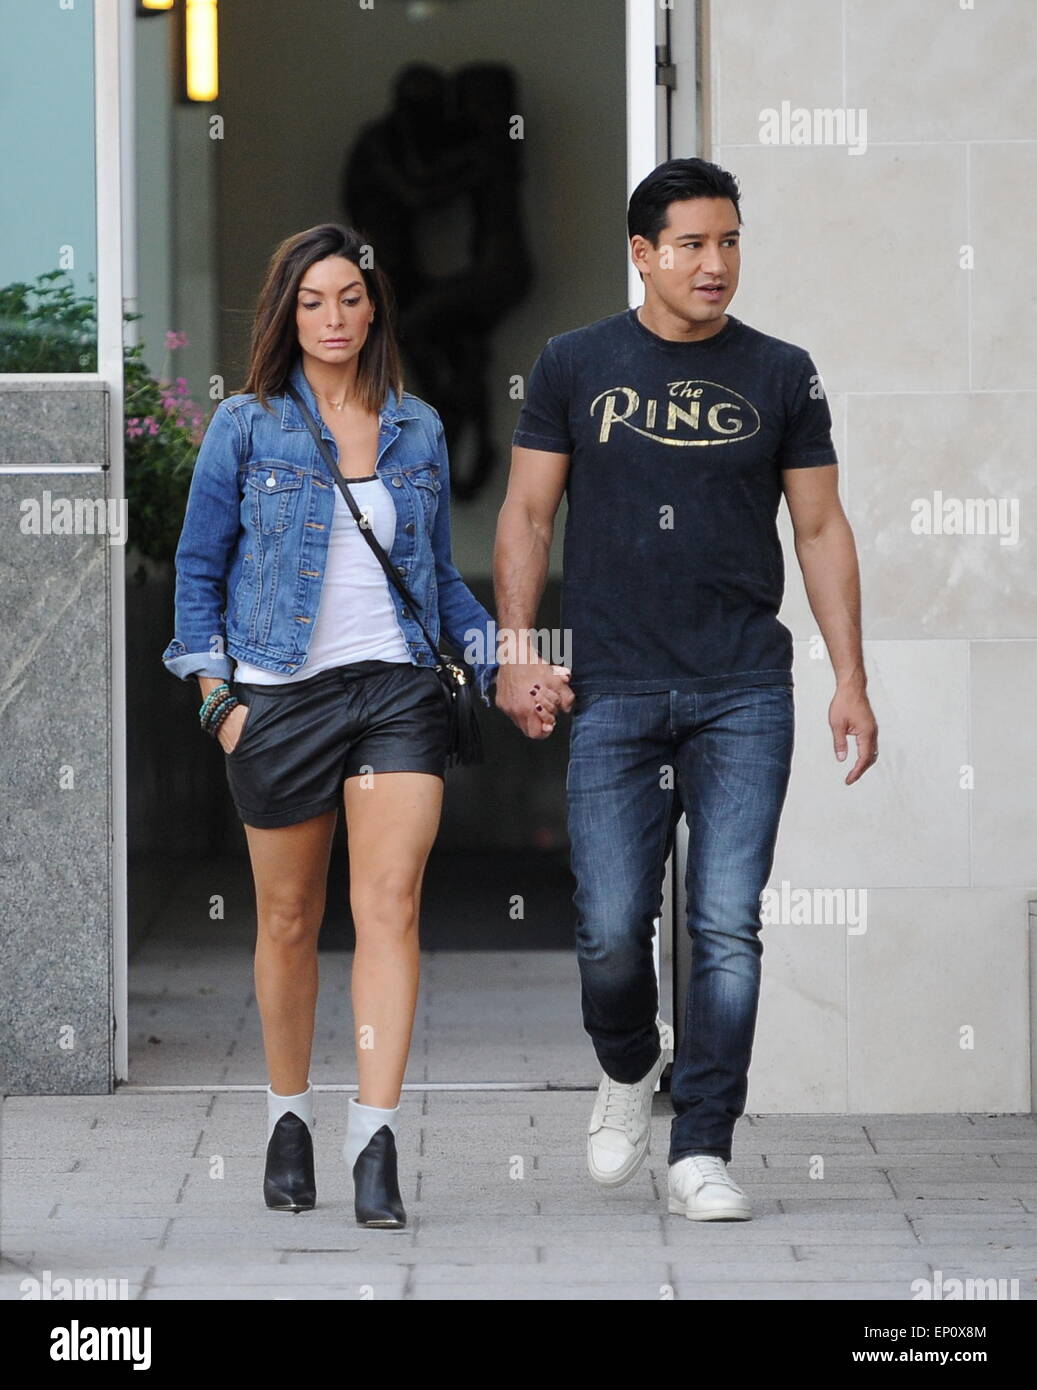 Mario Lopez spotted out holding hands with his wife Courtney Mazza  Featuring: Mario Lopez,Courtney Mazza Where: Beverly Hills, California, United States When: 07 Nov 2014 Credit: Cousart/JFXimages/WENN.com Stock Photo